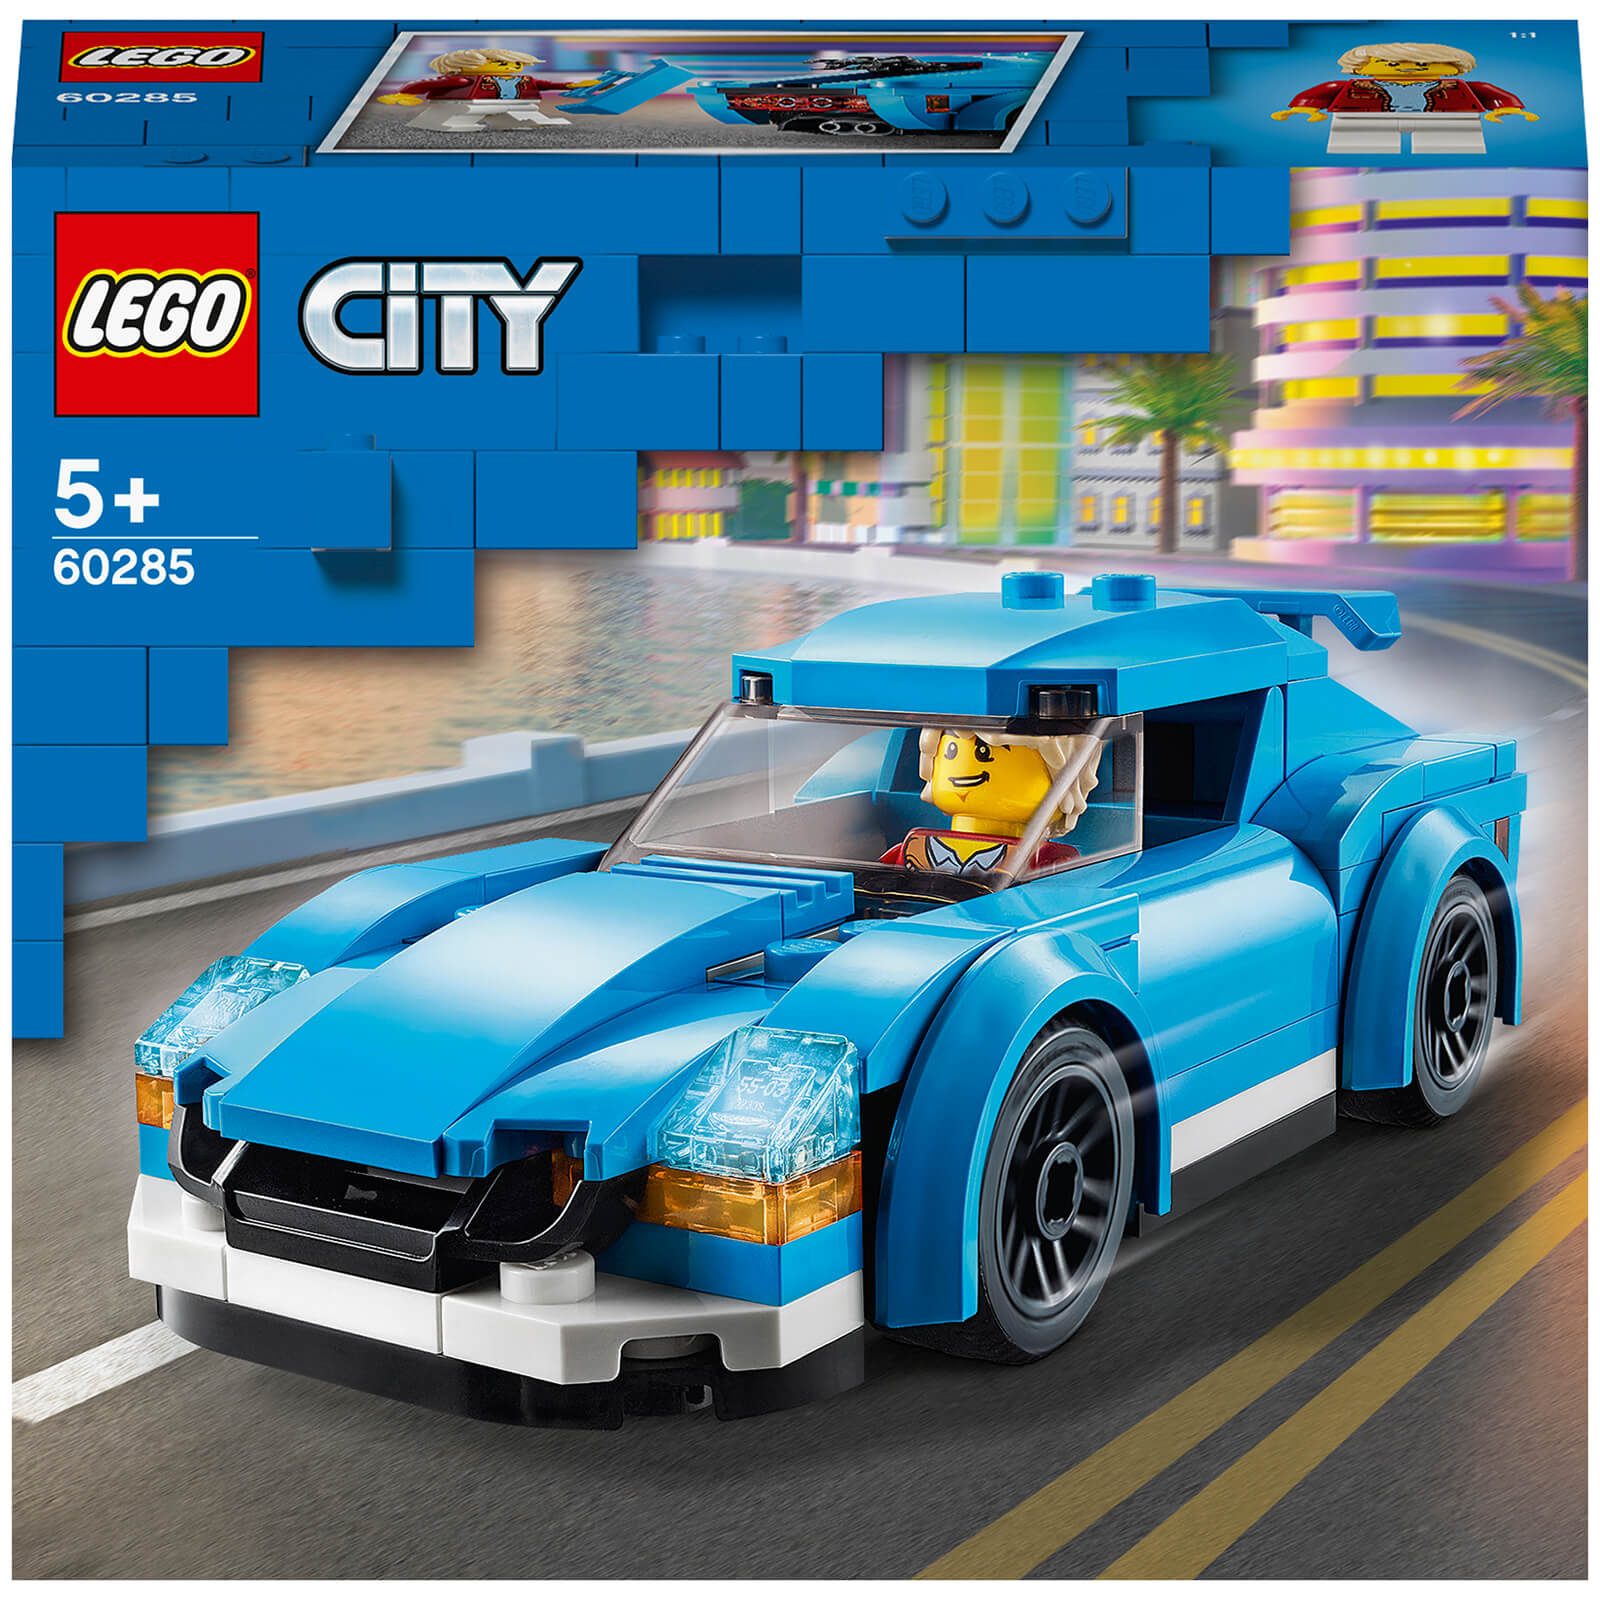 LEGO City: Great Vehicles Sports Car Toy (60285)